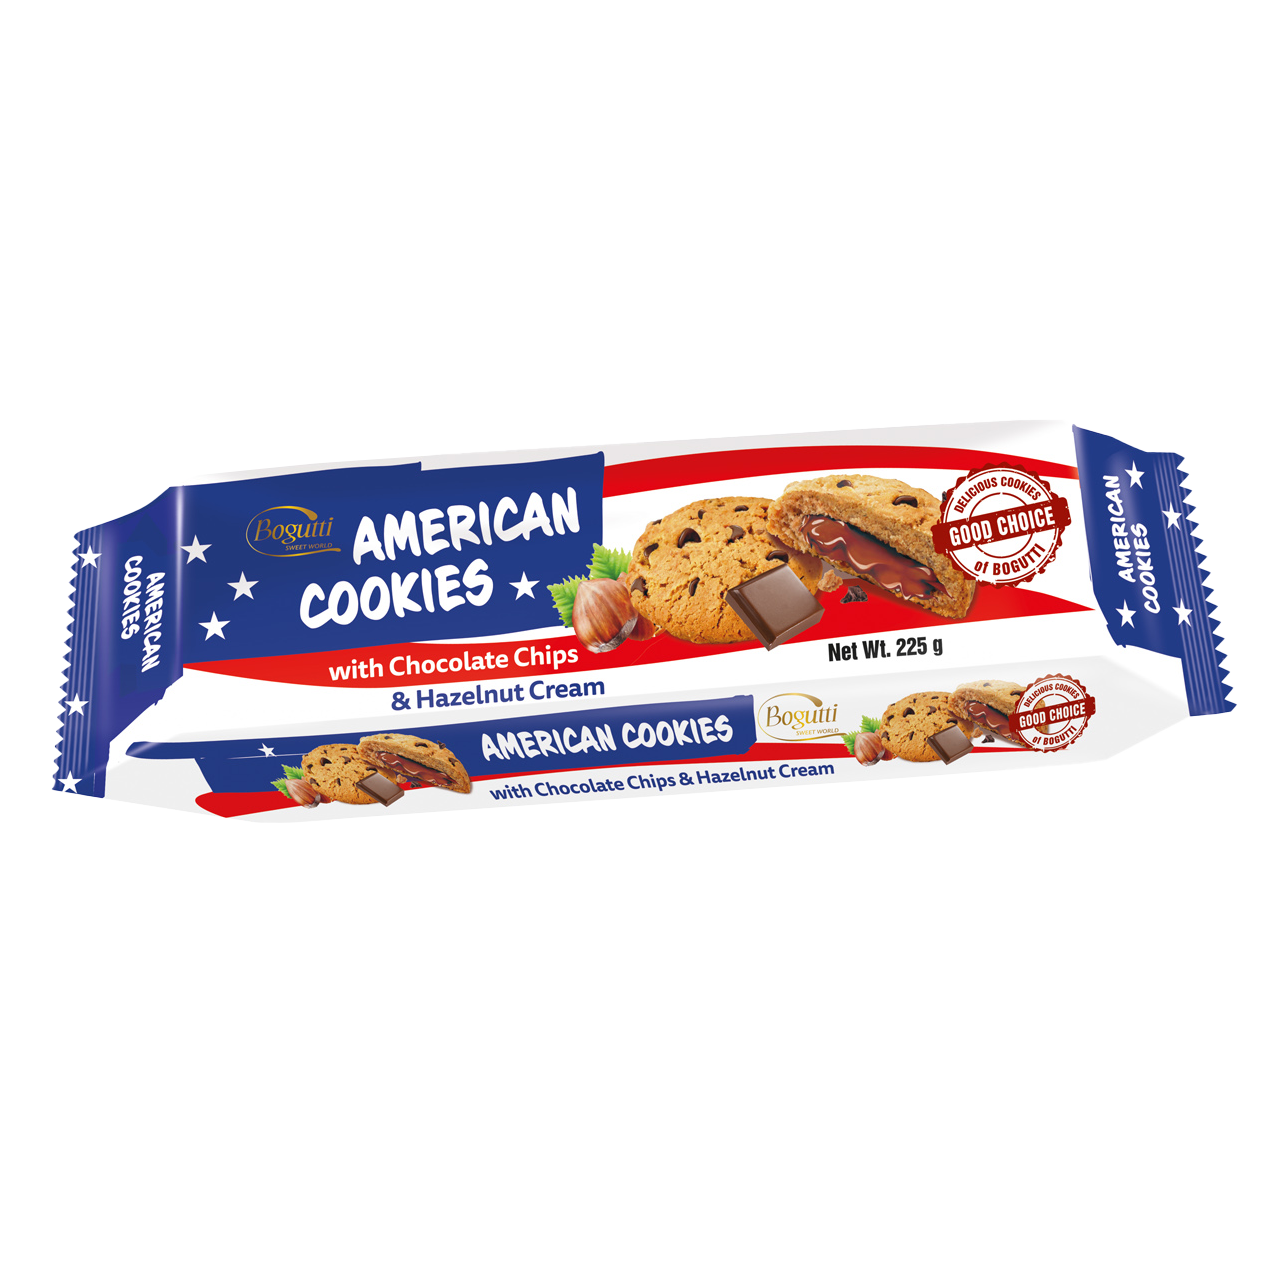 Cookies in American Style – Crunchy cookies with chocolate and hazelnut cream